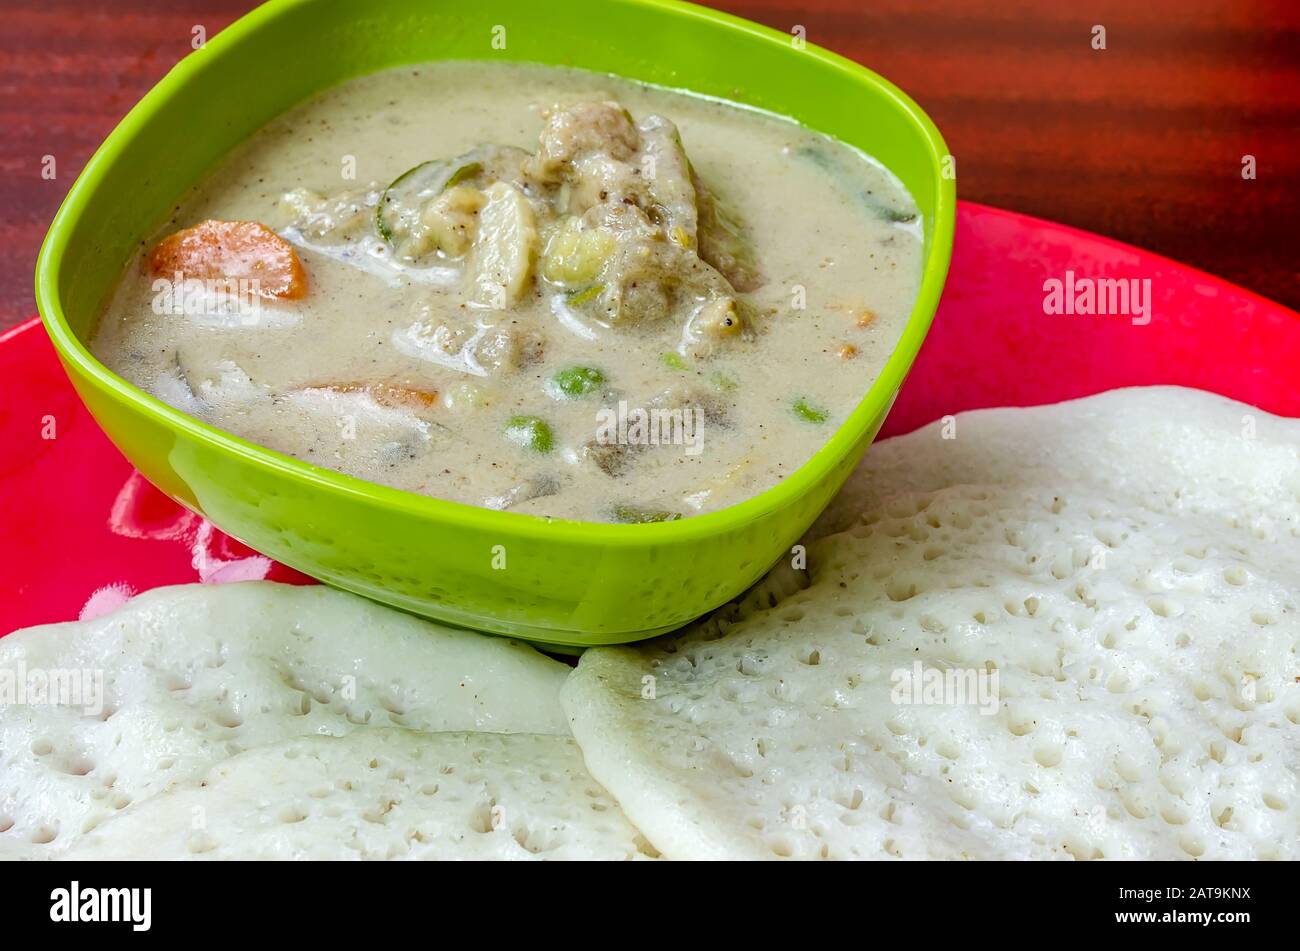 Kerala special breakfast, chicken stew and appams. Stock Photo